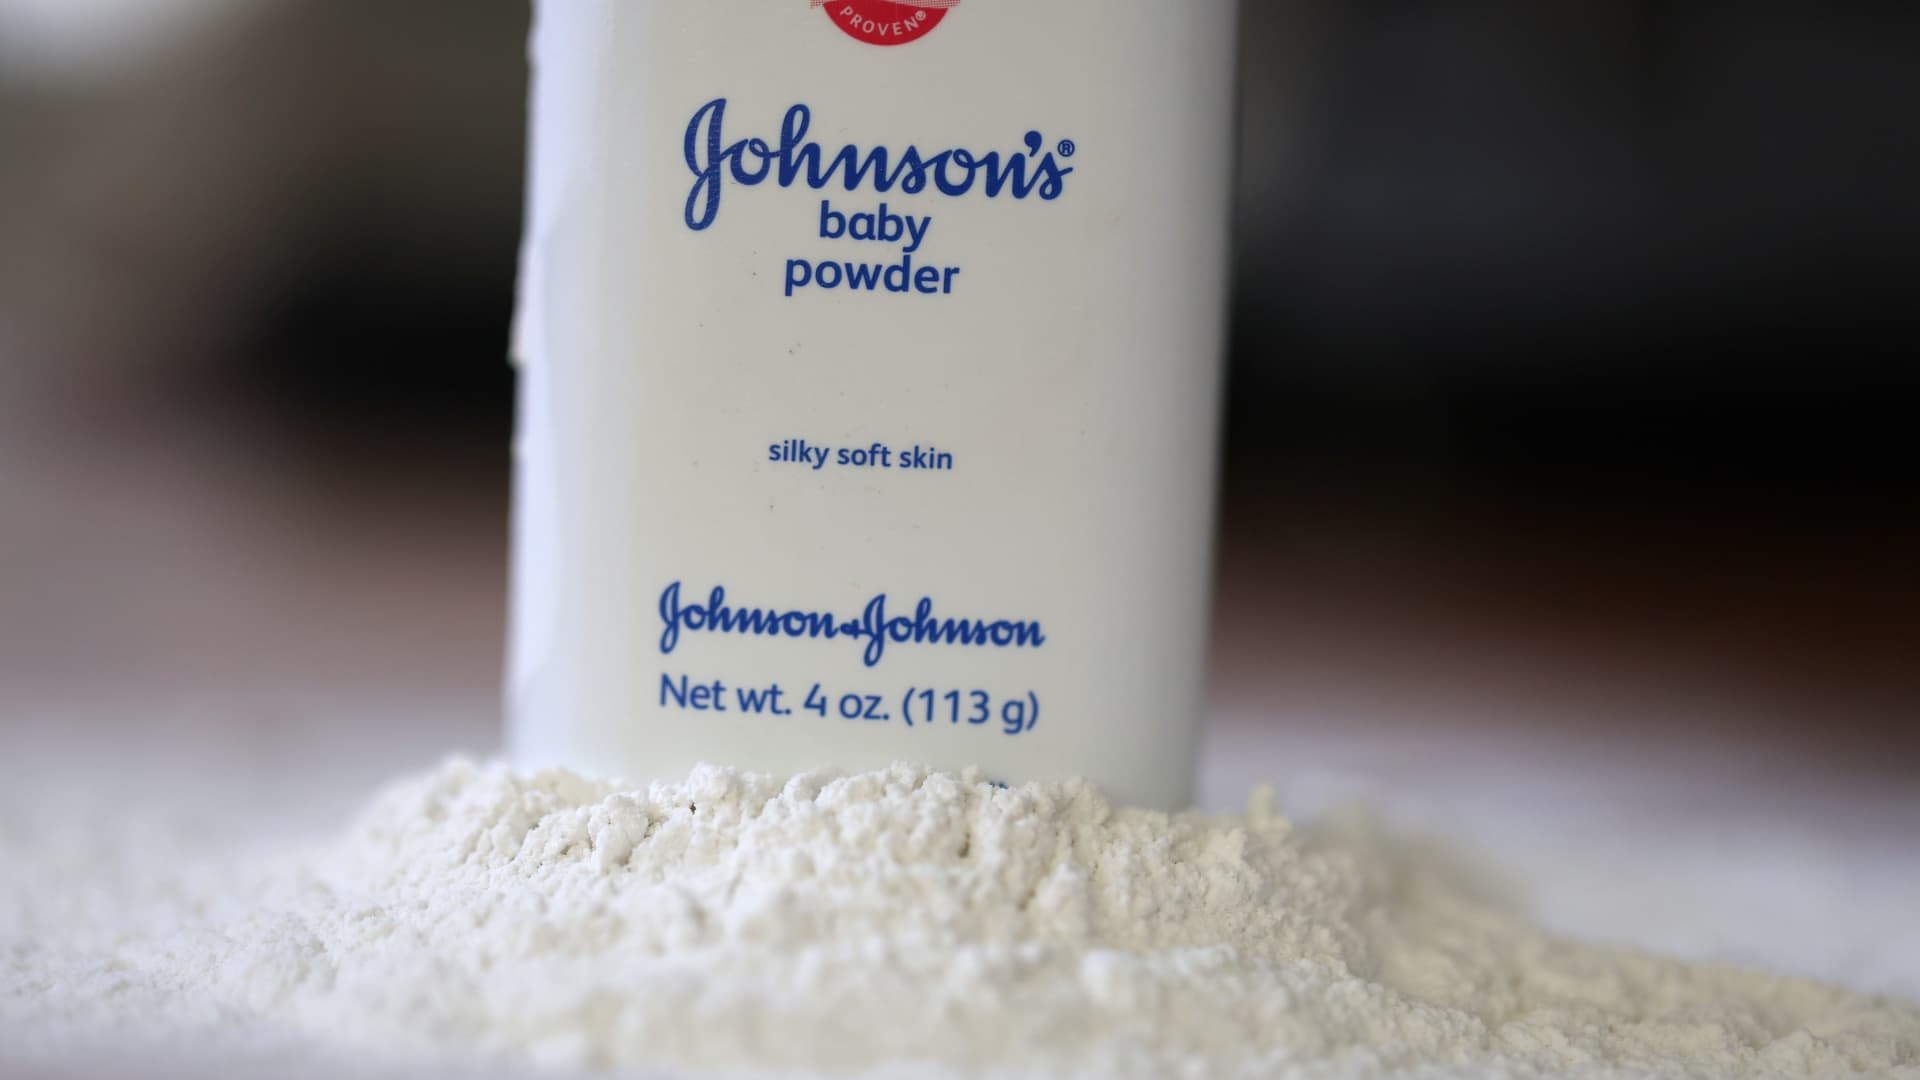 Johnson & Johnson effort to resolve talc cancer lawsuits in bankruptcy fails a second time